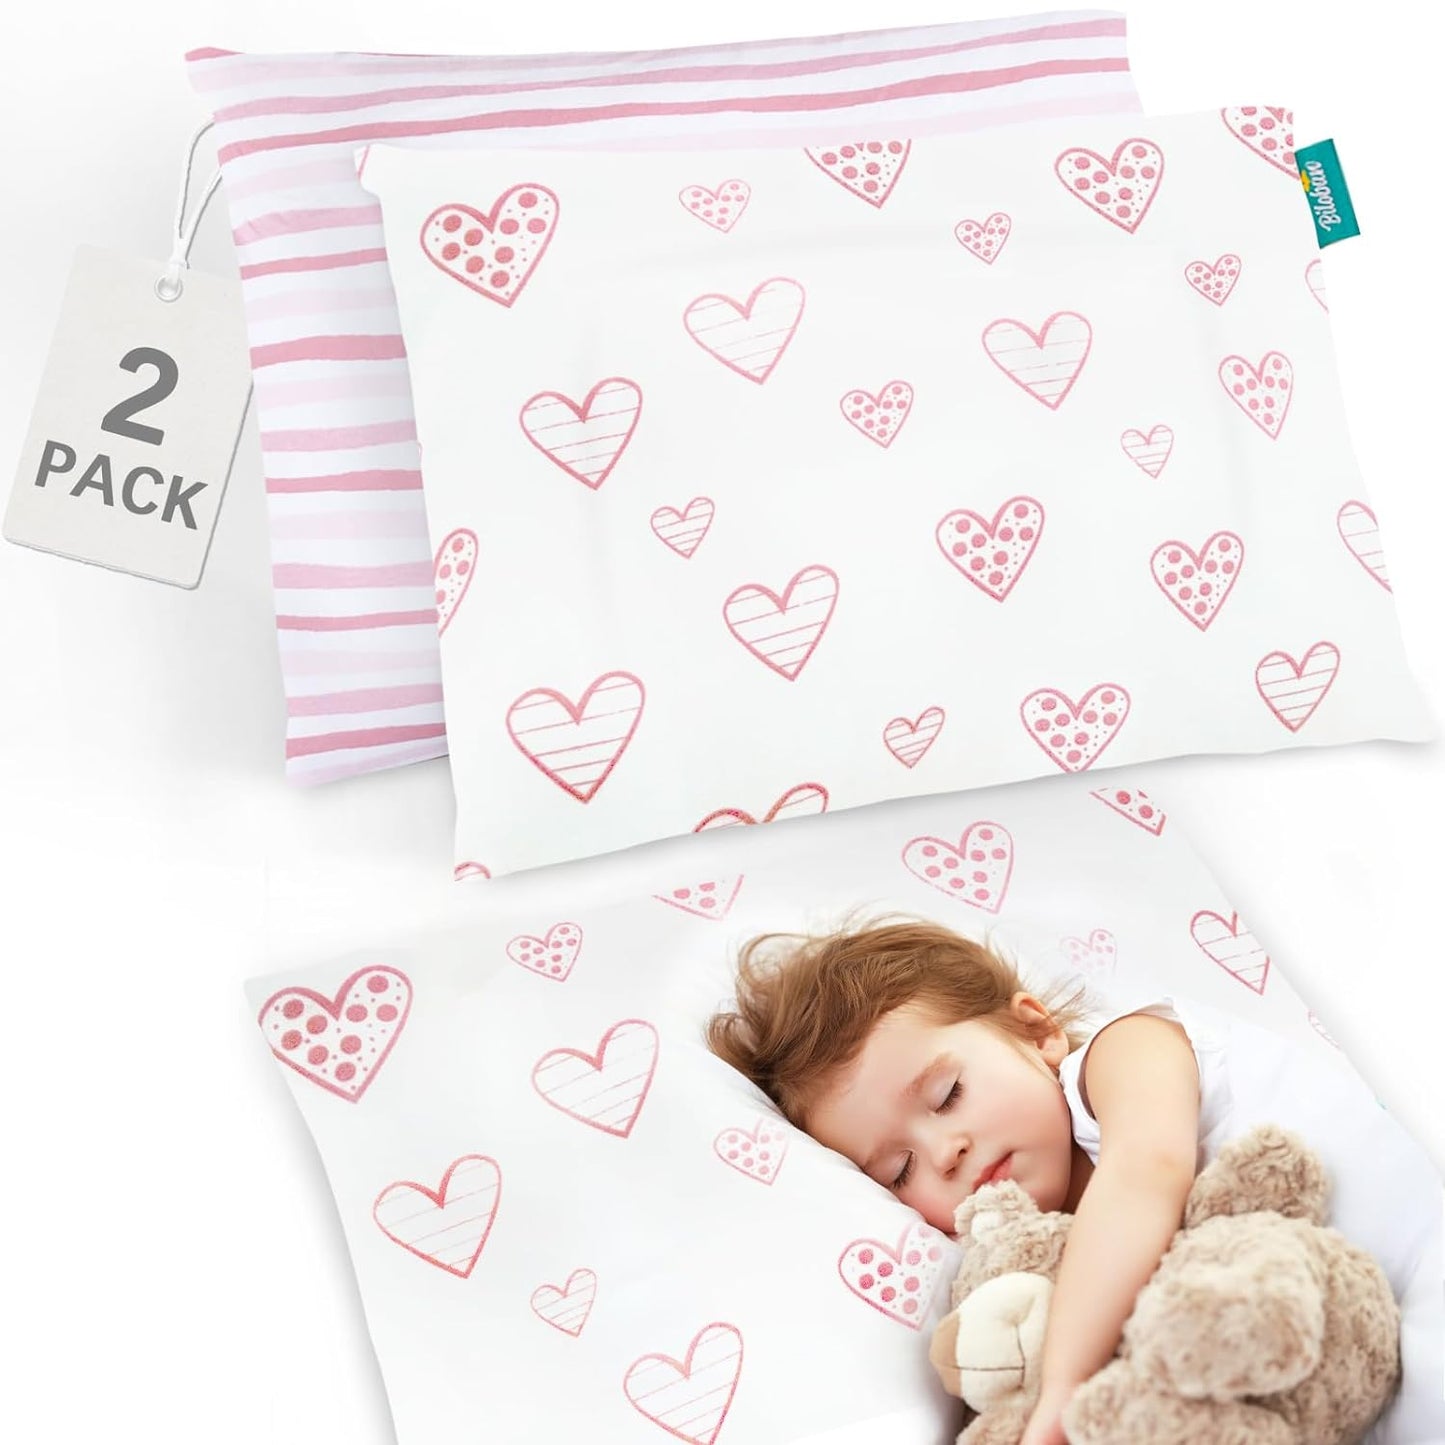 Toddler Pillow Quilted with Pillowcase - 2 Pack, 13" x 18", 100% Cotton, Ultra Soft & Breathable, Pink Heart & Stripe - Biloban Online Store